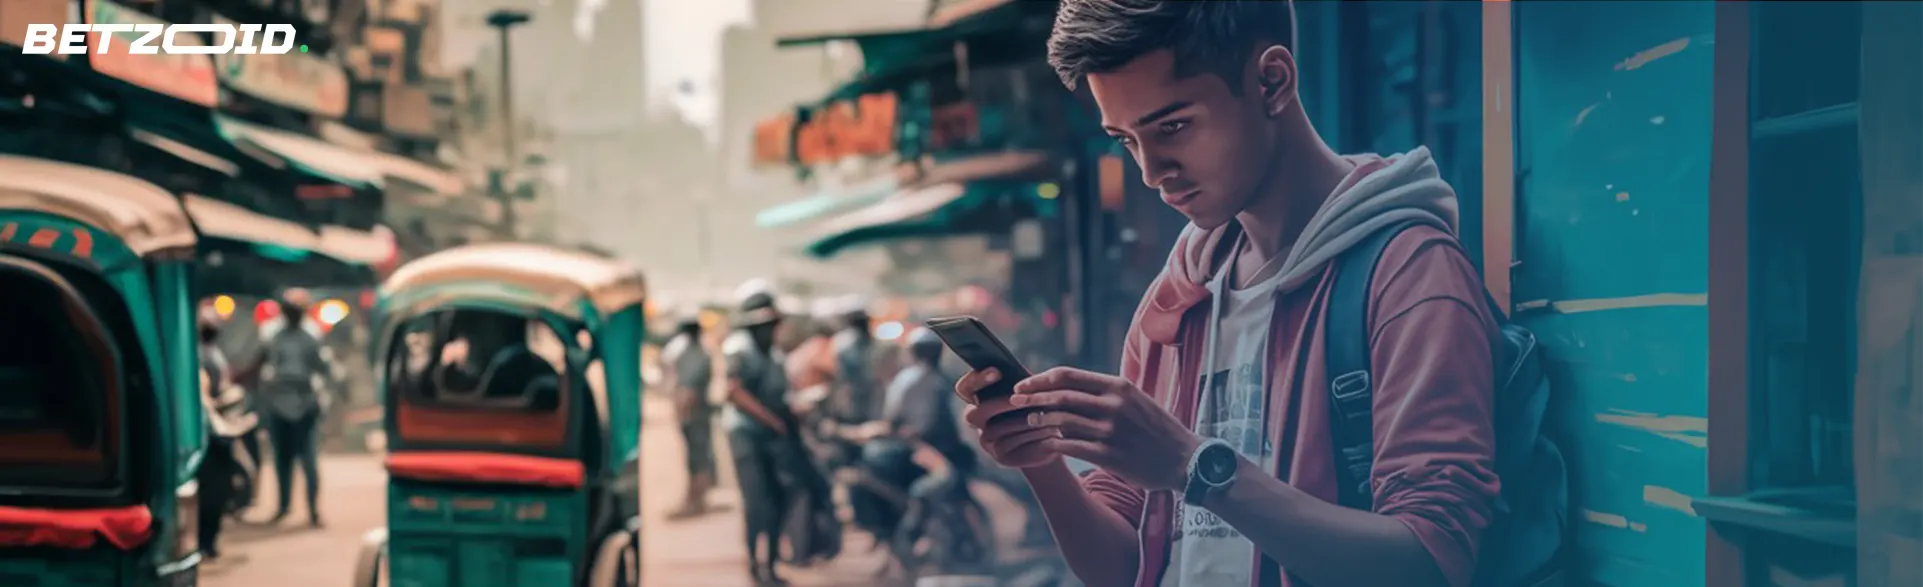 A young man using a live betting app on his phone in a busy Indian street.